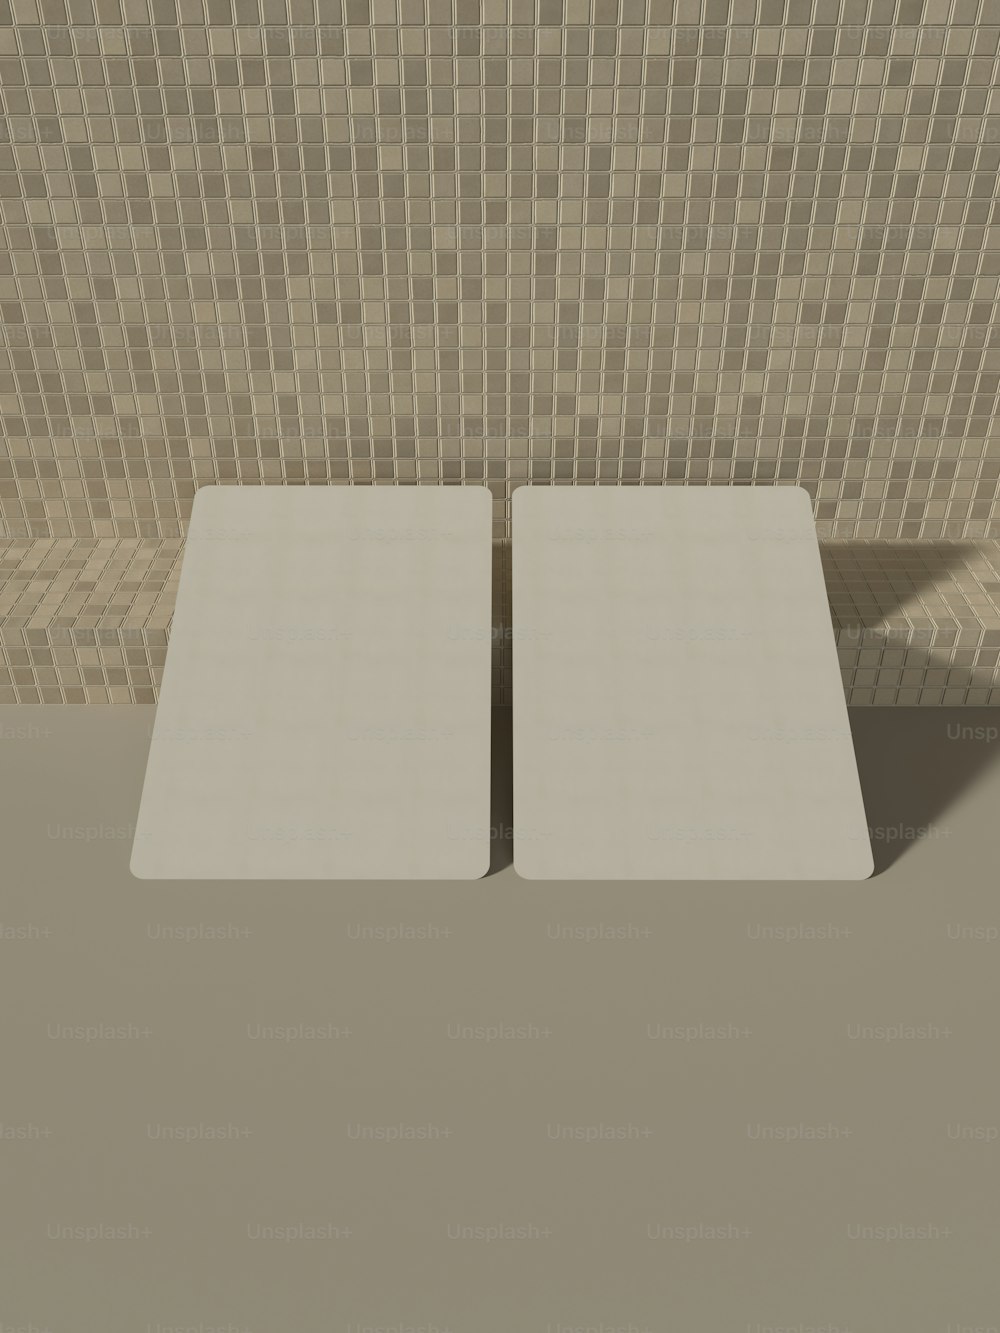 a pair of white square tables in front of a tiled wall